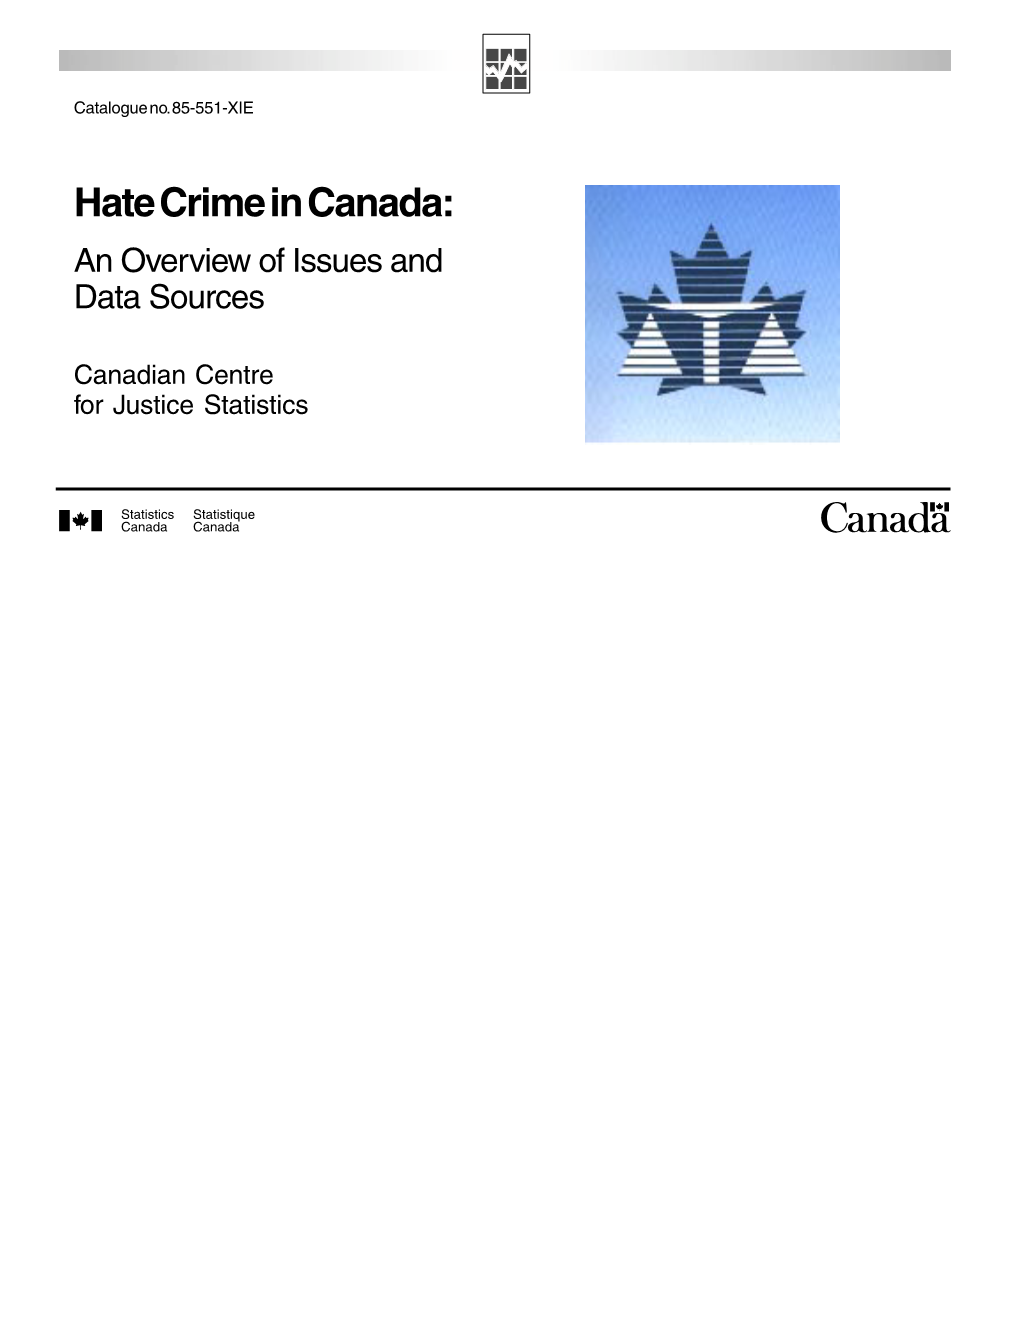 Hate Crime in Canada: an Overview of Issues and Data Sources